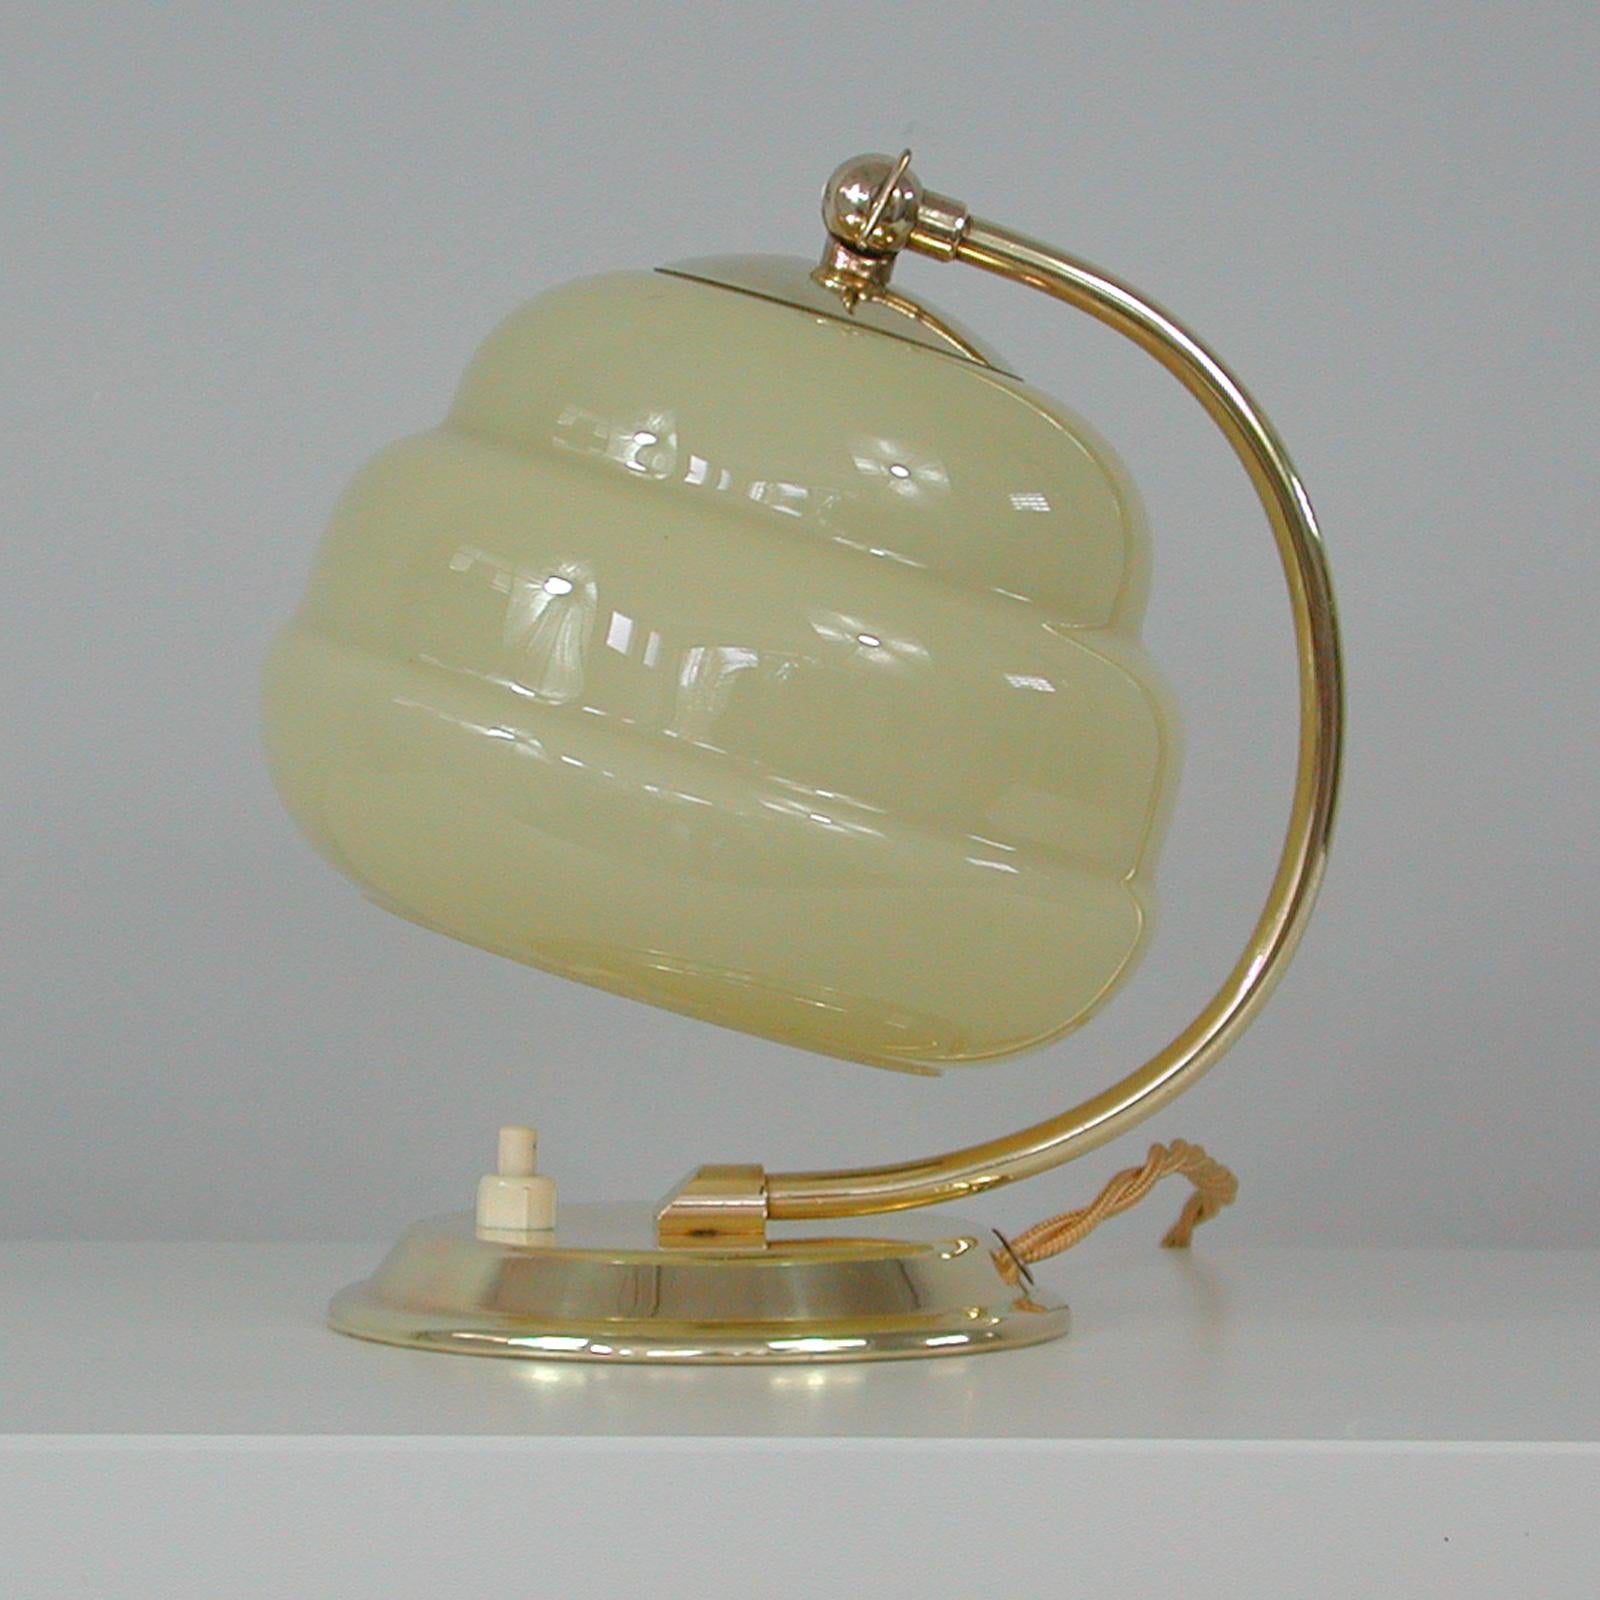 This unusual vintage table or bedside lamp was made in Germany in the 1930s-1940s during the Art Deco / Bauhaus period. It features a brass lamp base, brass lamp arm and an adjustable beehive shaped lampshade in ivory colored opaline glass. Original